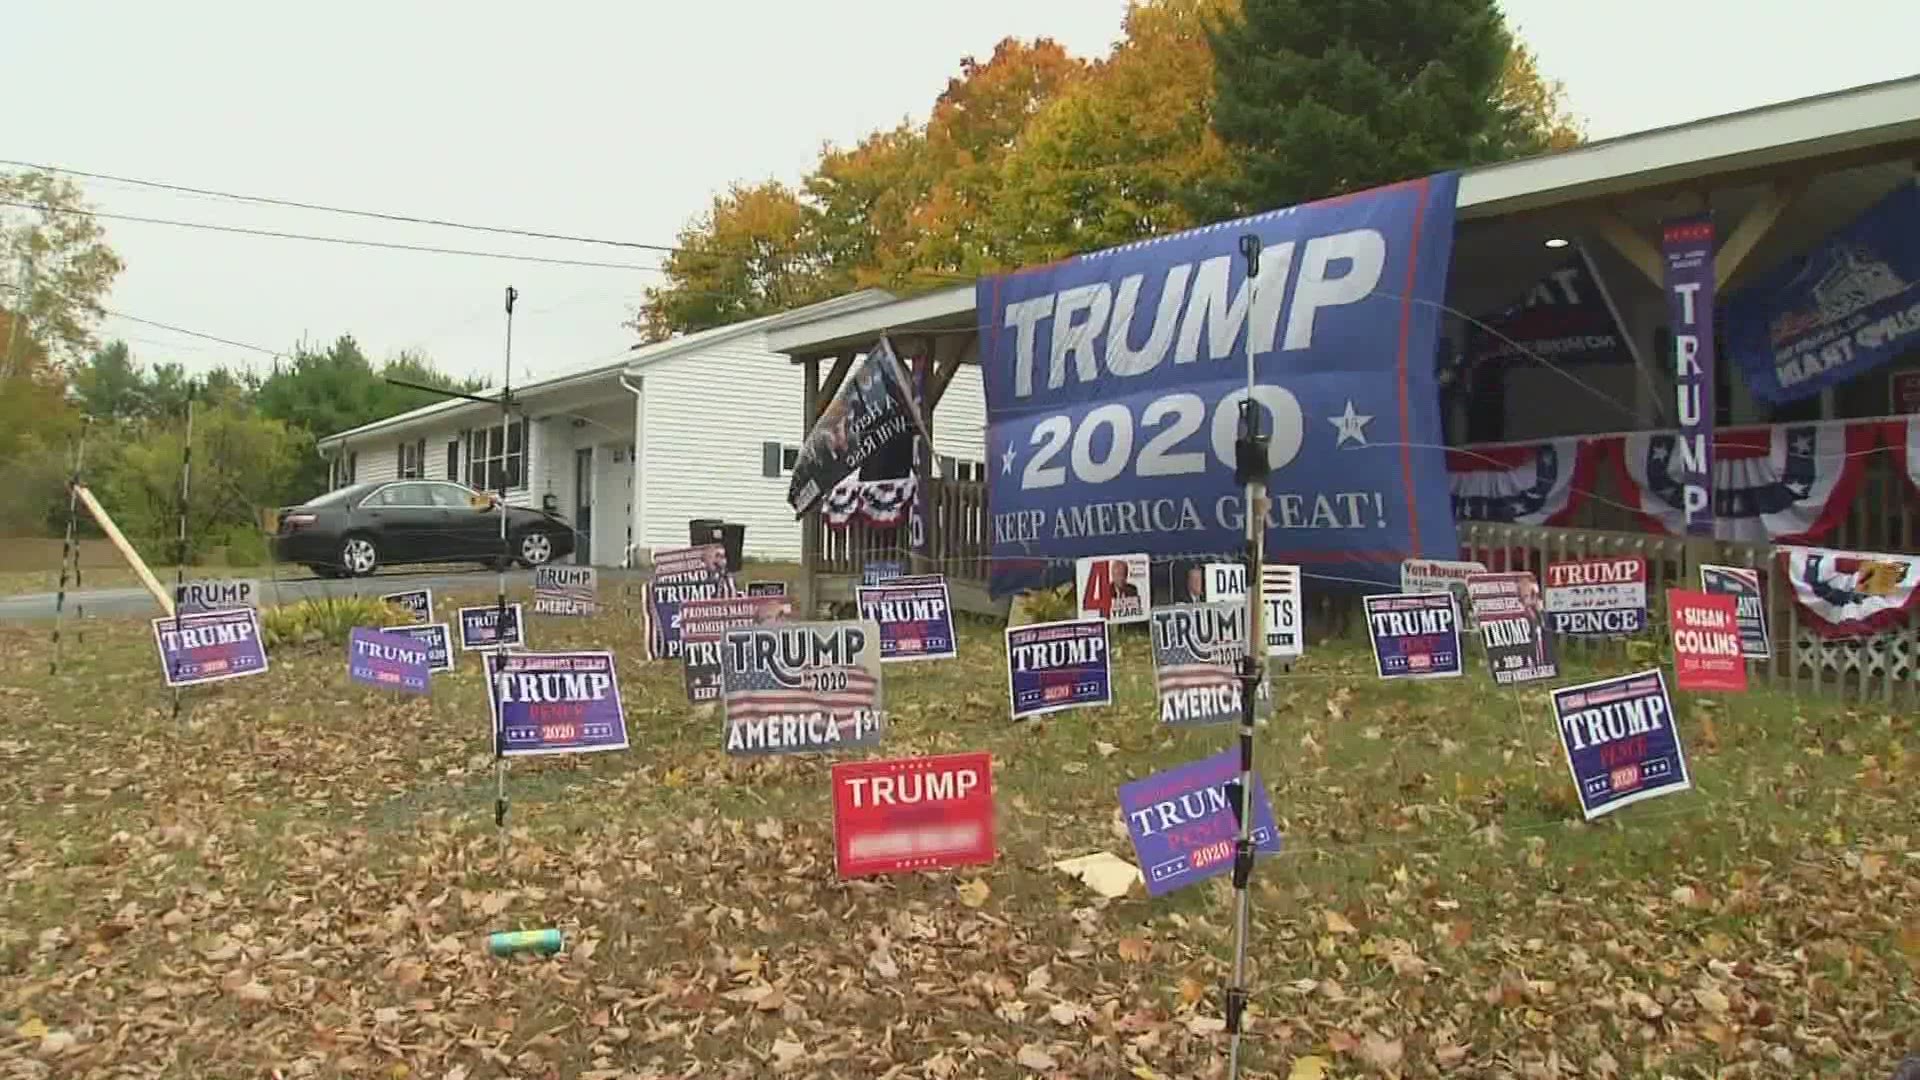 A Trump supporter in Maine had his signs supporting the president stolen this year, so he came up with a BIG solution to that issue.